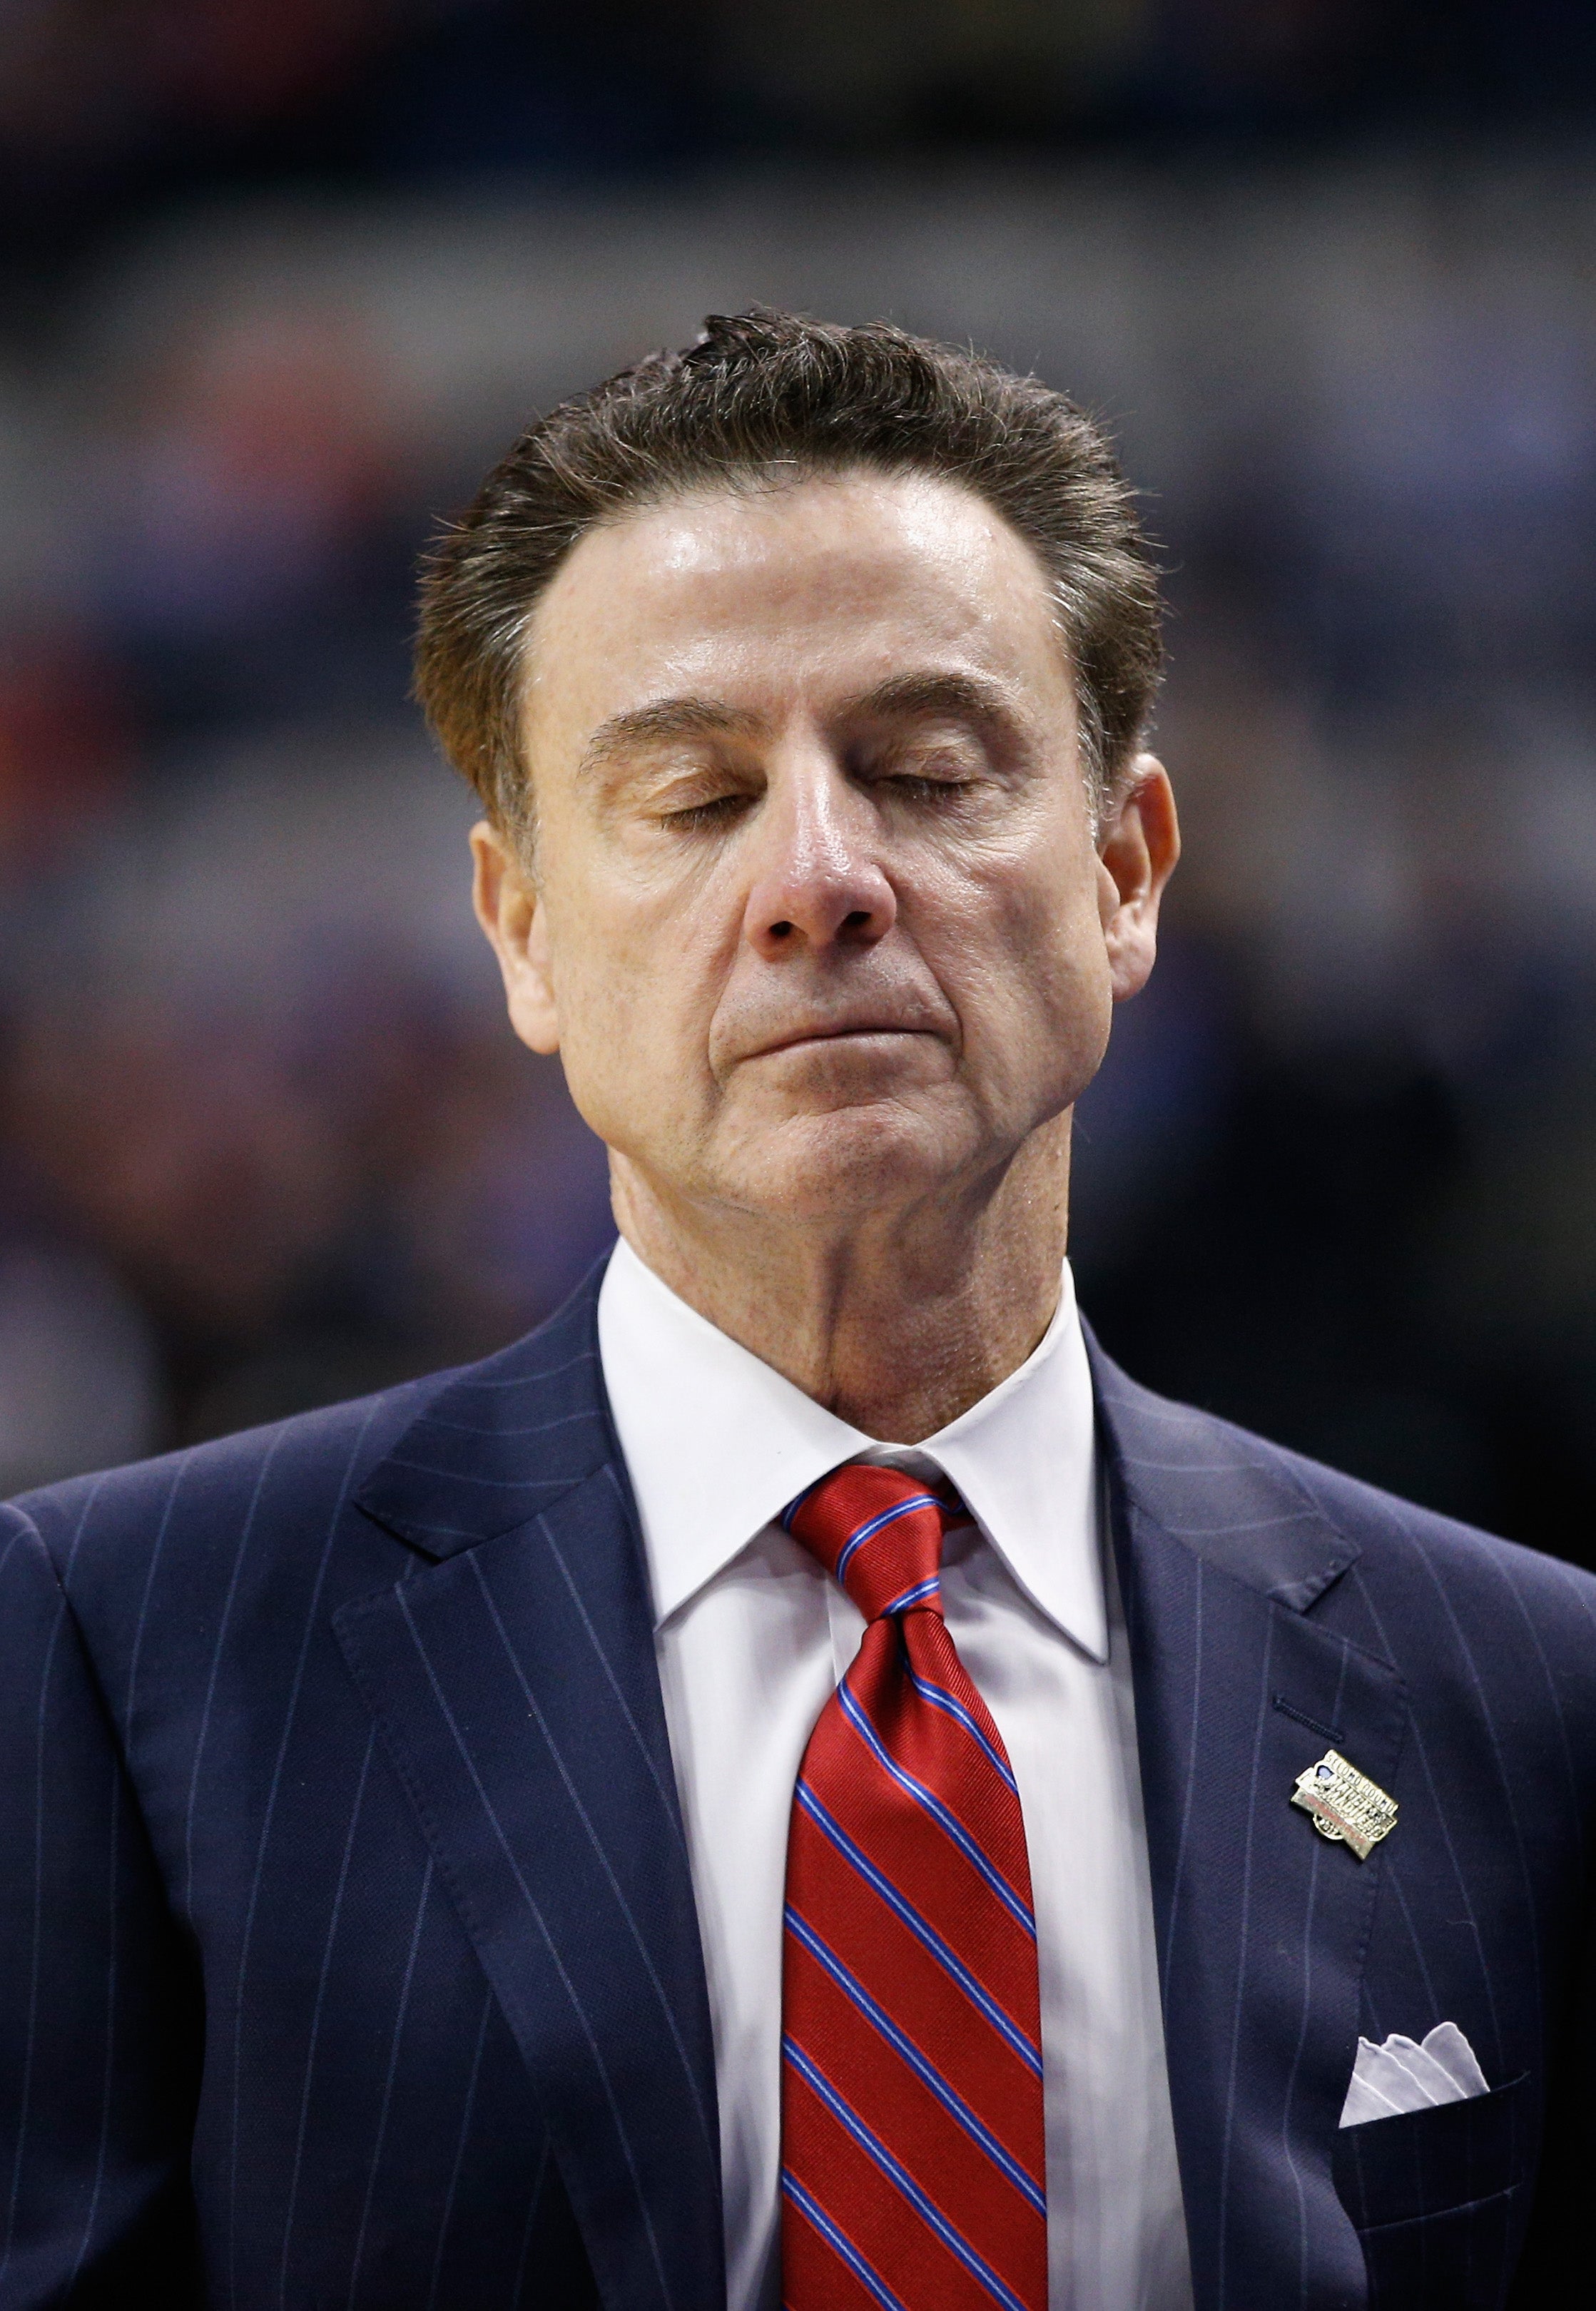 A College Sports Scandal So Big It Got Rick Pitino Fired! - The Rush Limbaugh Show2237 x 3239